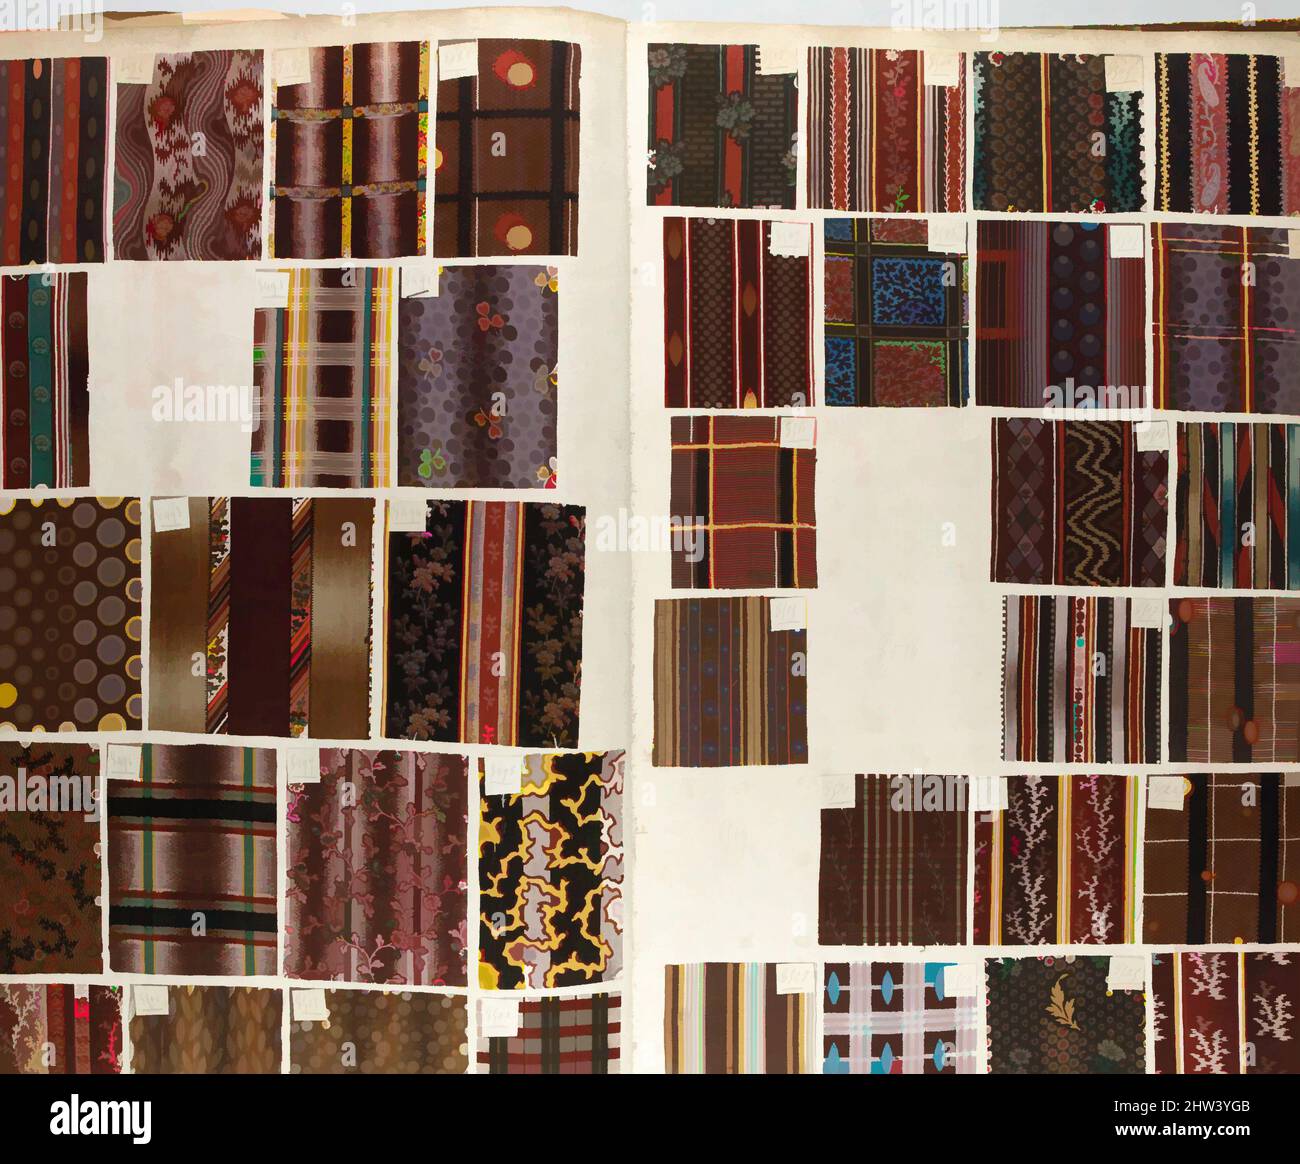 Art inspired by Textile Sample Book labeled 'Indiennes et Organdis', 1860s, French, H. 21 x W. 15 x D. 2 1/2 inches, Textiles-Sample Books, Classic works modernized by Artotop with a splash of modernity. Shapes, color and value, eye-catching visual impact on art. Emotions through freedom of artworks in a contemporary way. A timeless message pursuing a wildly creative new direction. Artists turning to the digital medium and creating the Artotop NFT Stock Photo